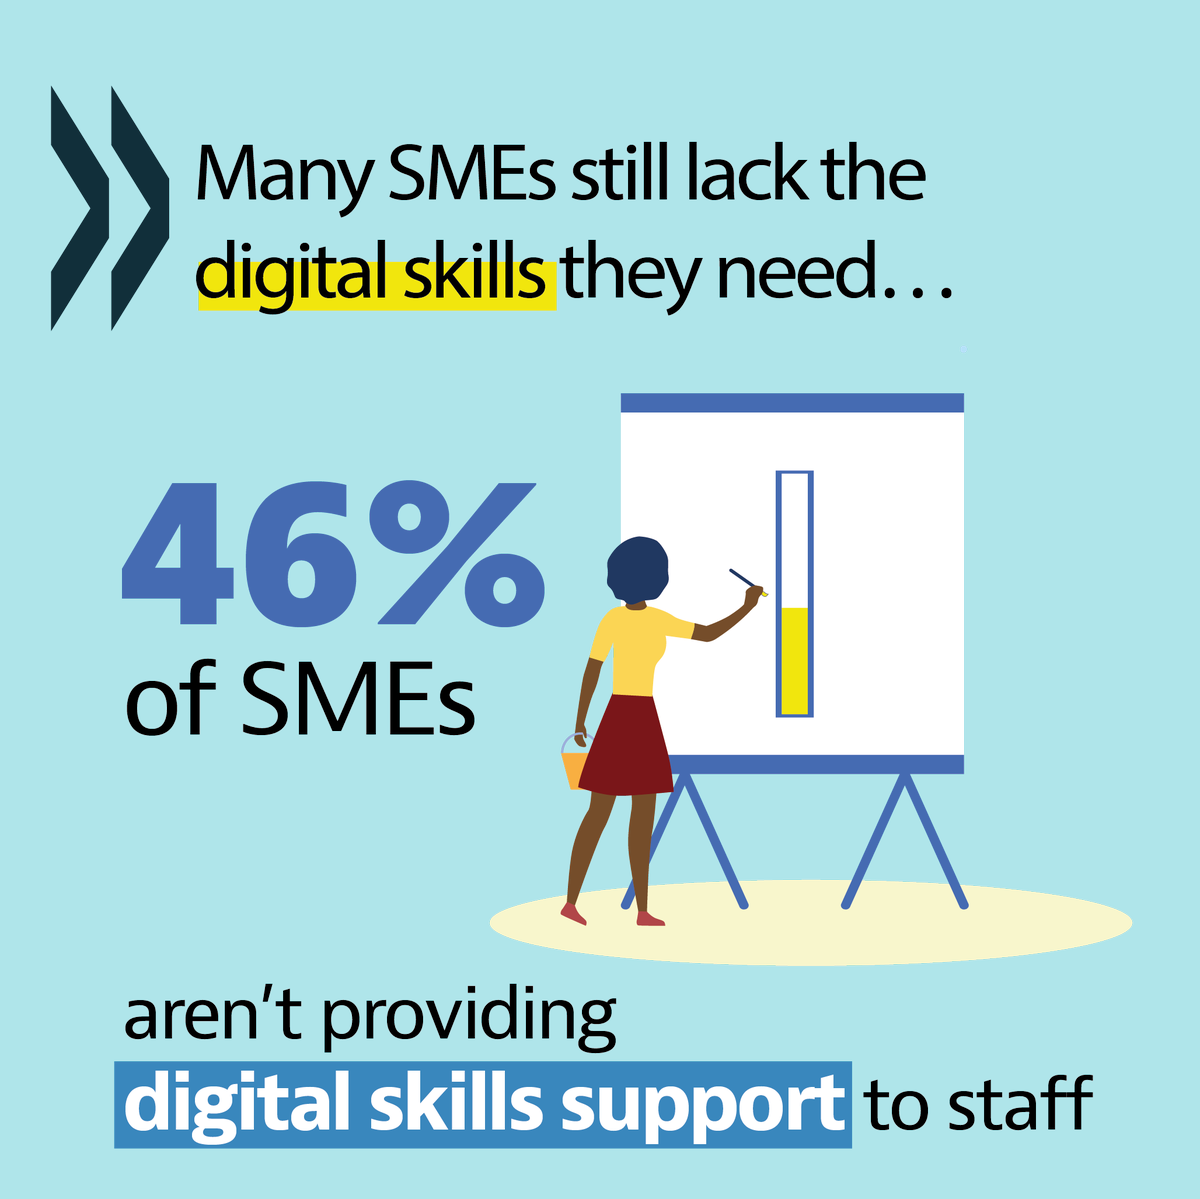 💡Digital training can help #SMEs become more resilient. However: 🔸Only 8️⃣% of SMEs provide internal training to develop digital skills 🔸An even lower proportion (6️⃣%) allow for external training. Find out more in the latest #D4SME survey: 🔗oe.cd/5vG